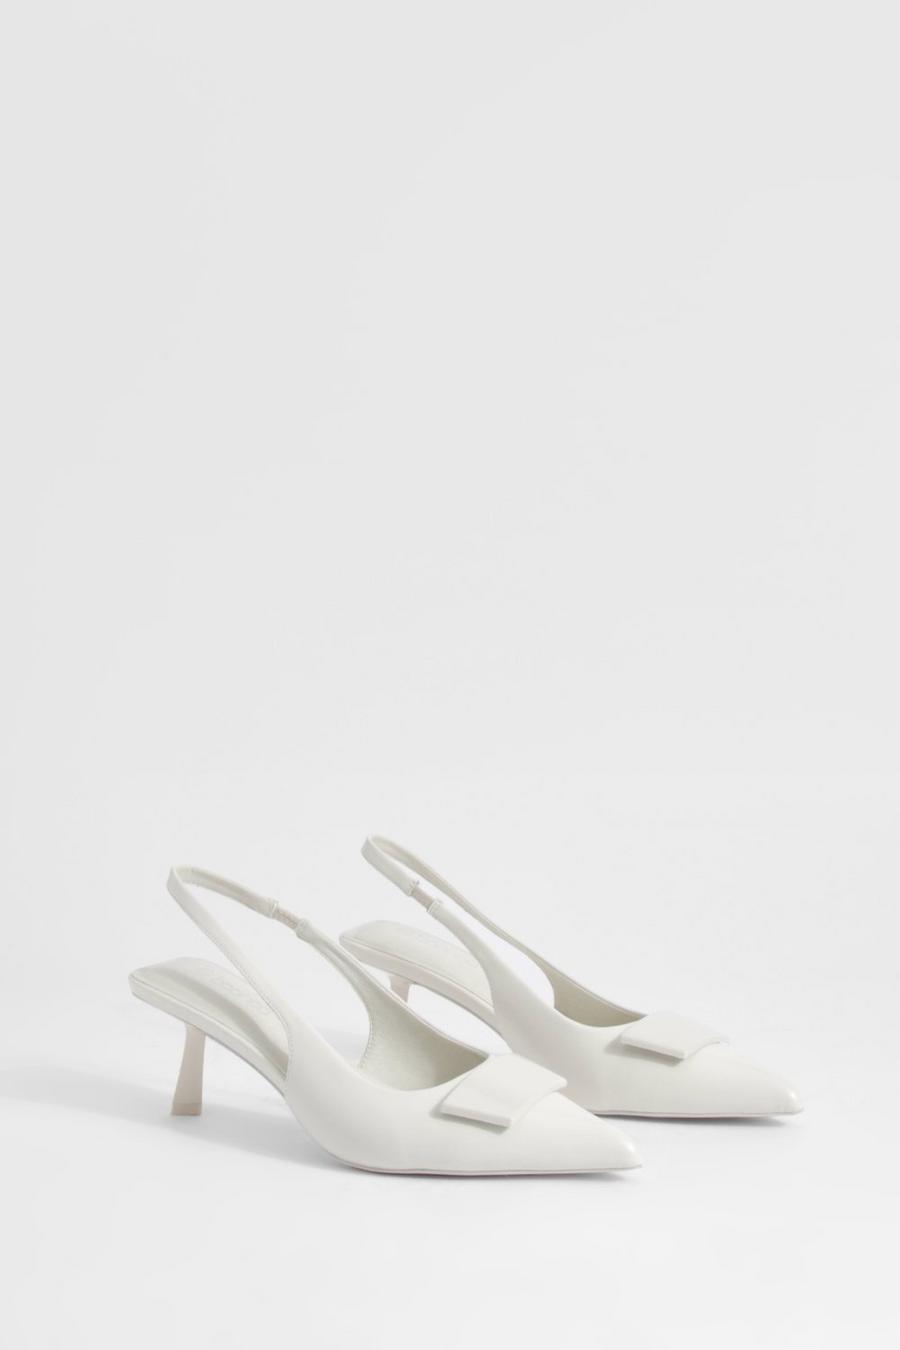 White Moores shoe style is often sharp and vintage-inspired